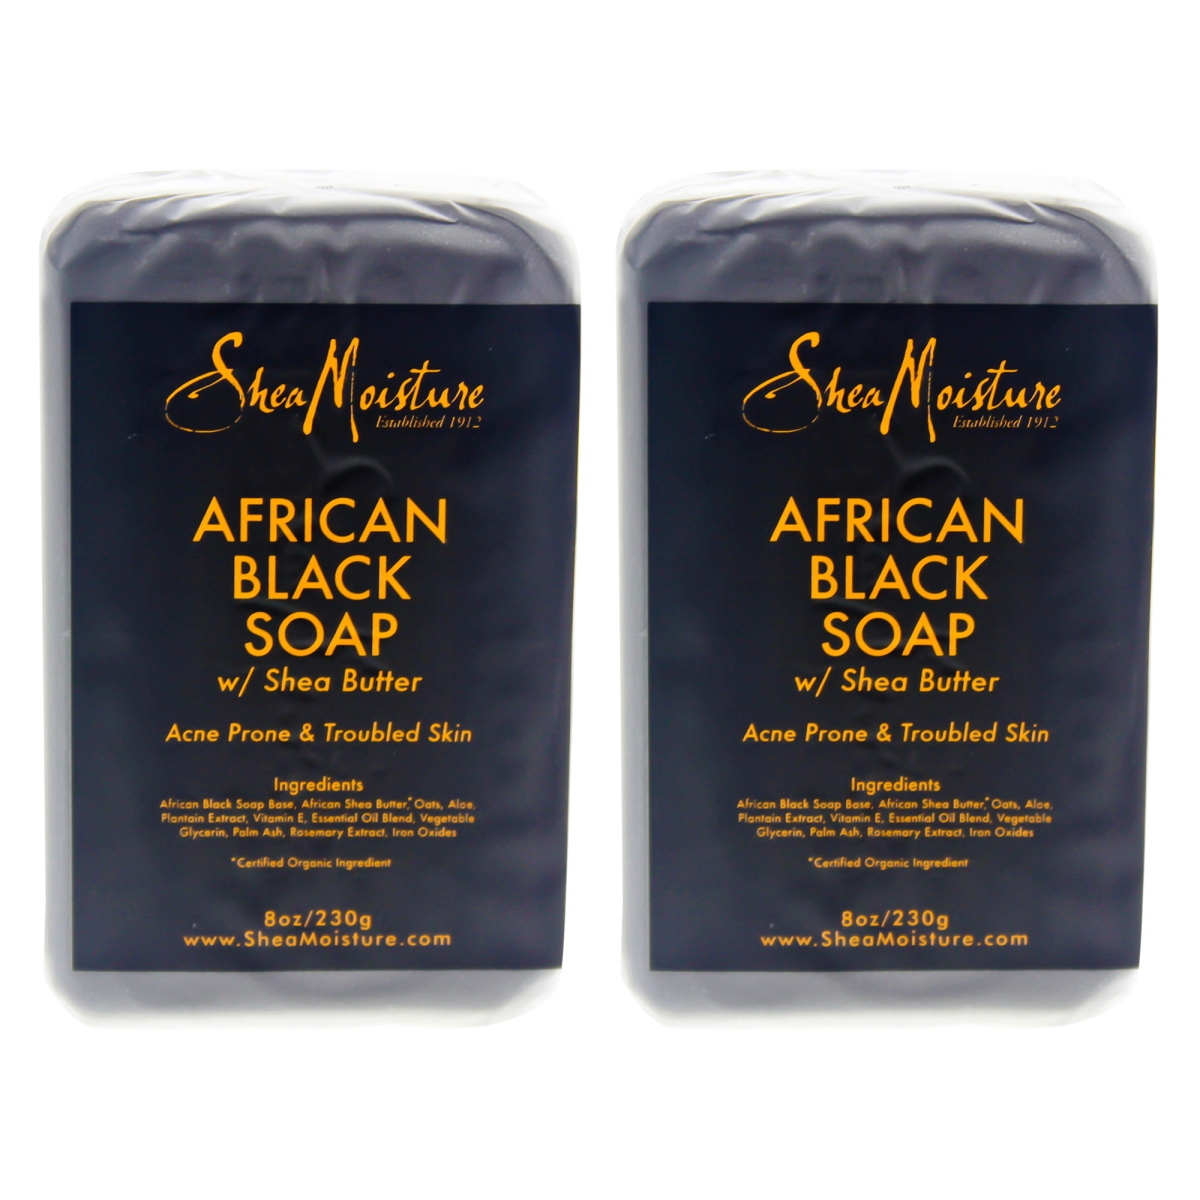 K0000001 African Black Soap Bar Acne Prone & Troubled Skin For Unisex - 8 Oz - Pack Of 2